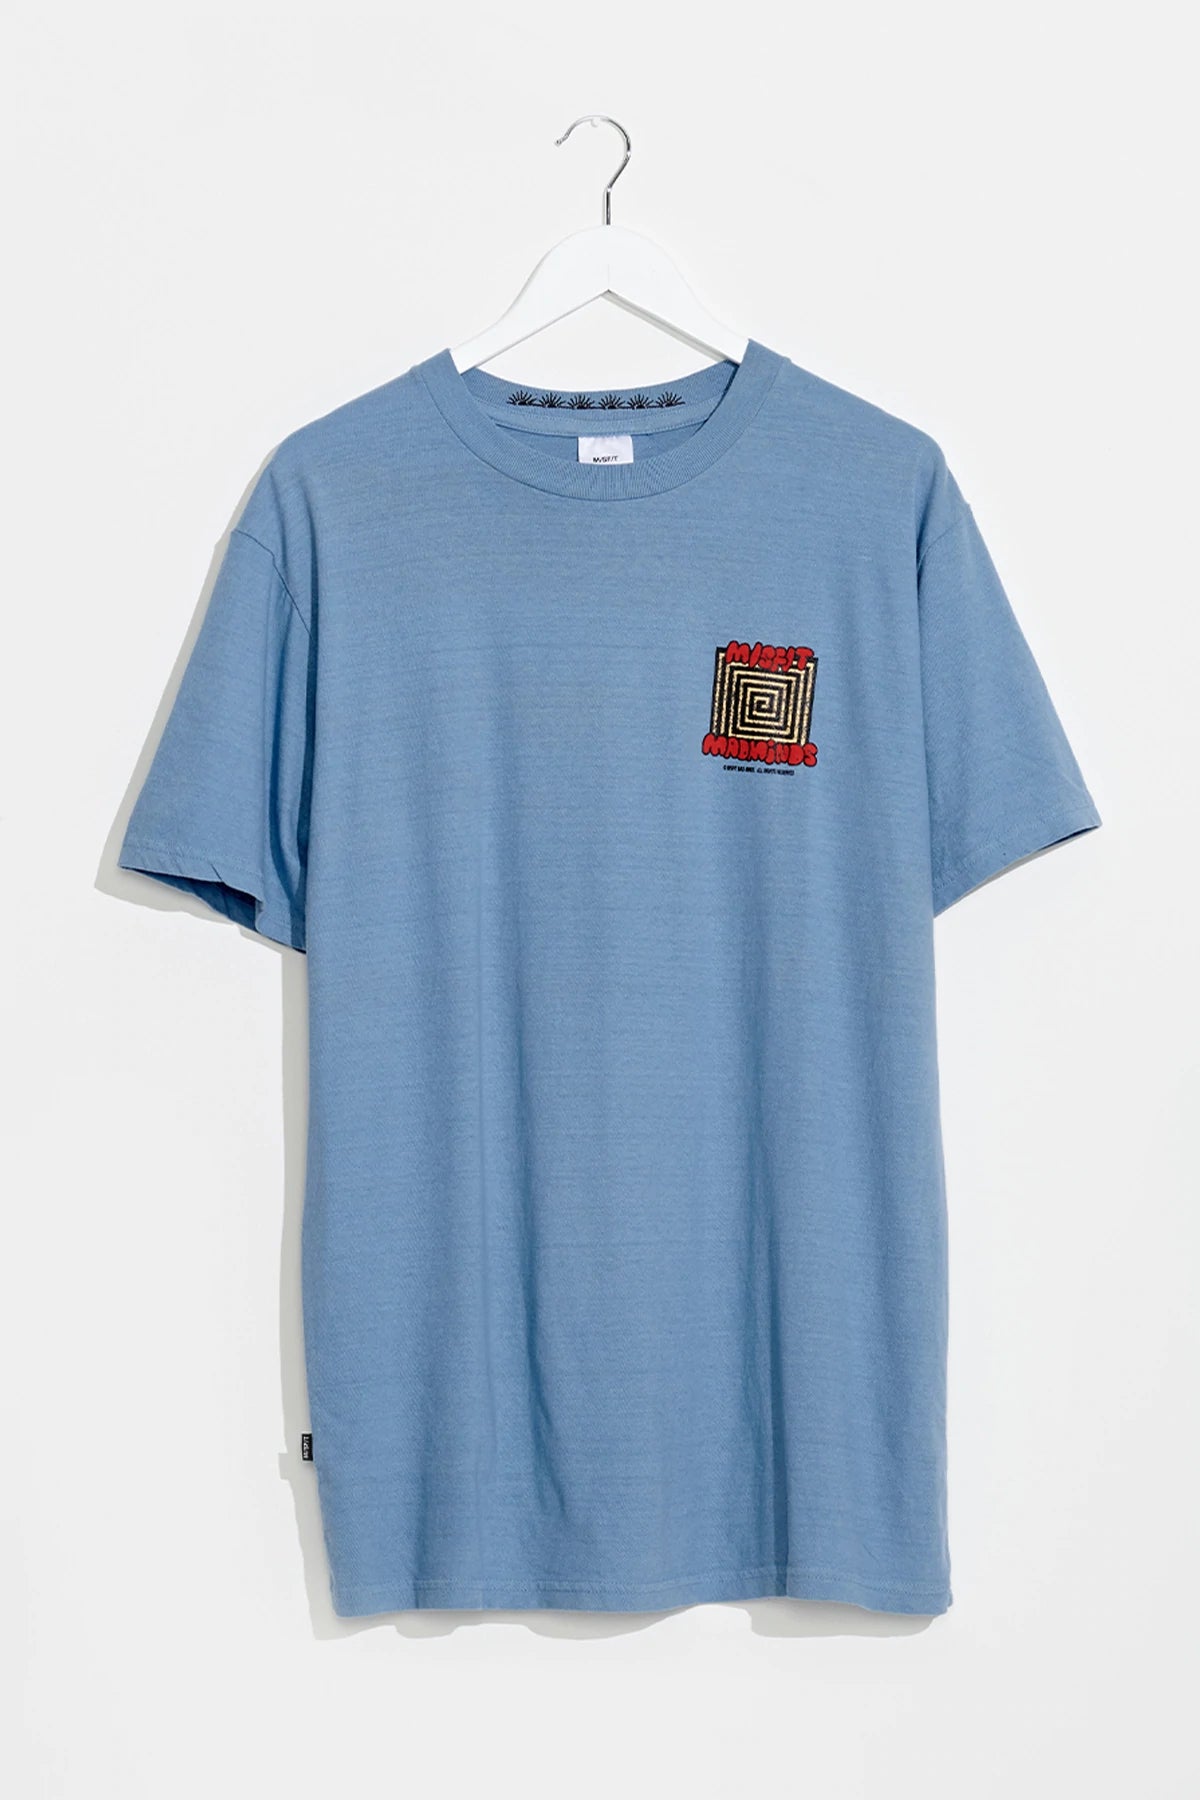 Loothole 50/50 Reg SS Tee - Pigment Washed